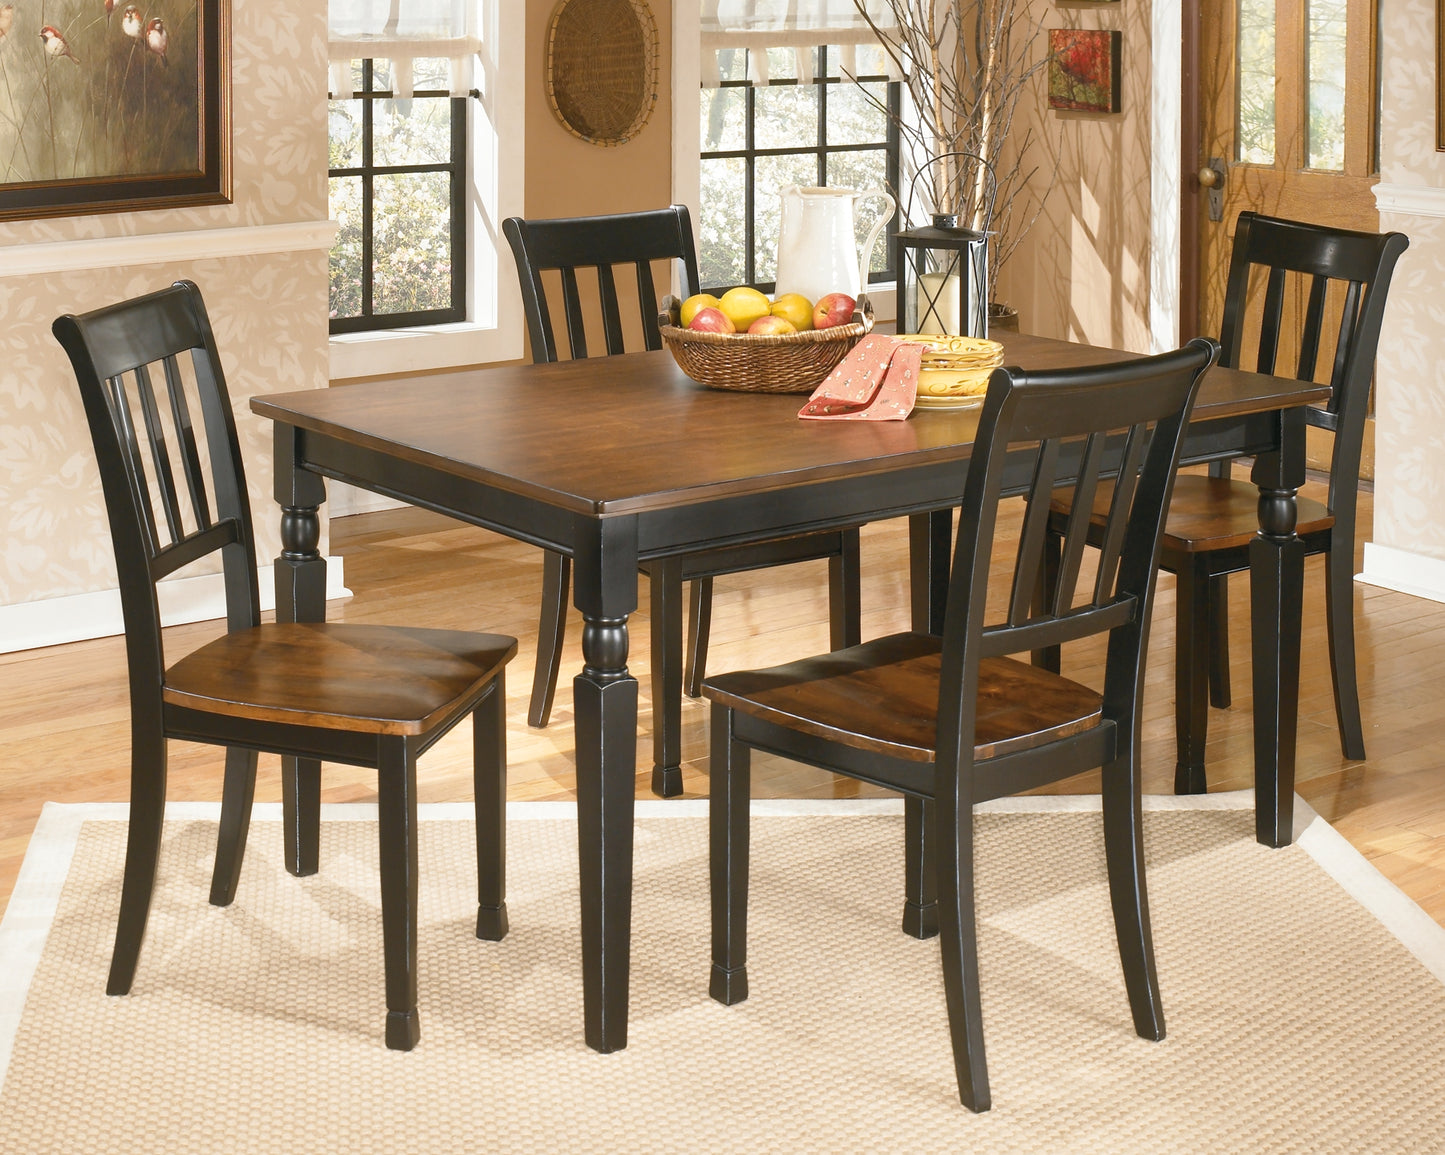 Owingsville Dining Table and 4 Chairs Wilson Furniture (OH)  in Bridgeport, Ohio. Serving Bridgeport, Yorkville, Bellaire, & Avondale